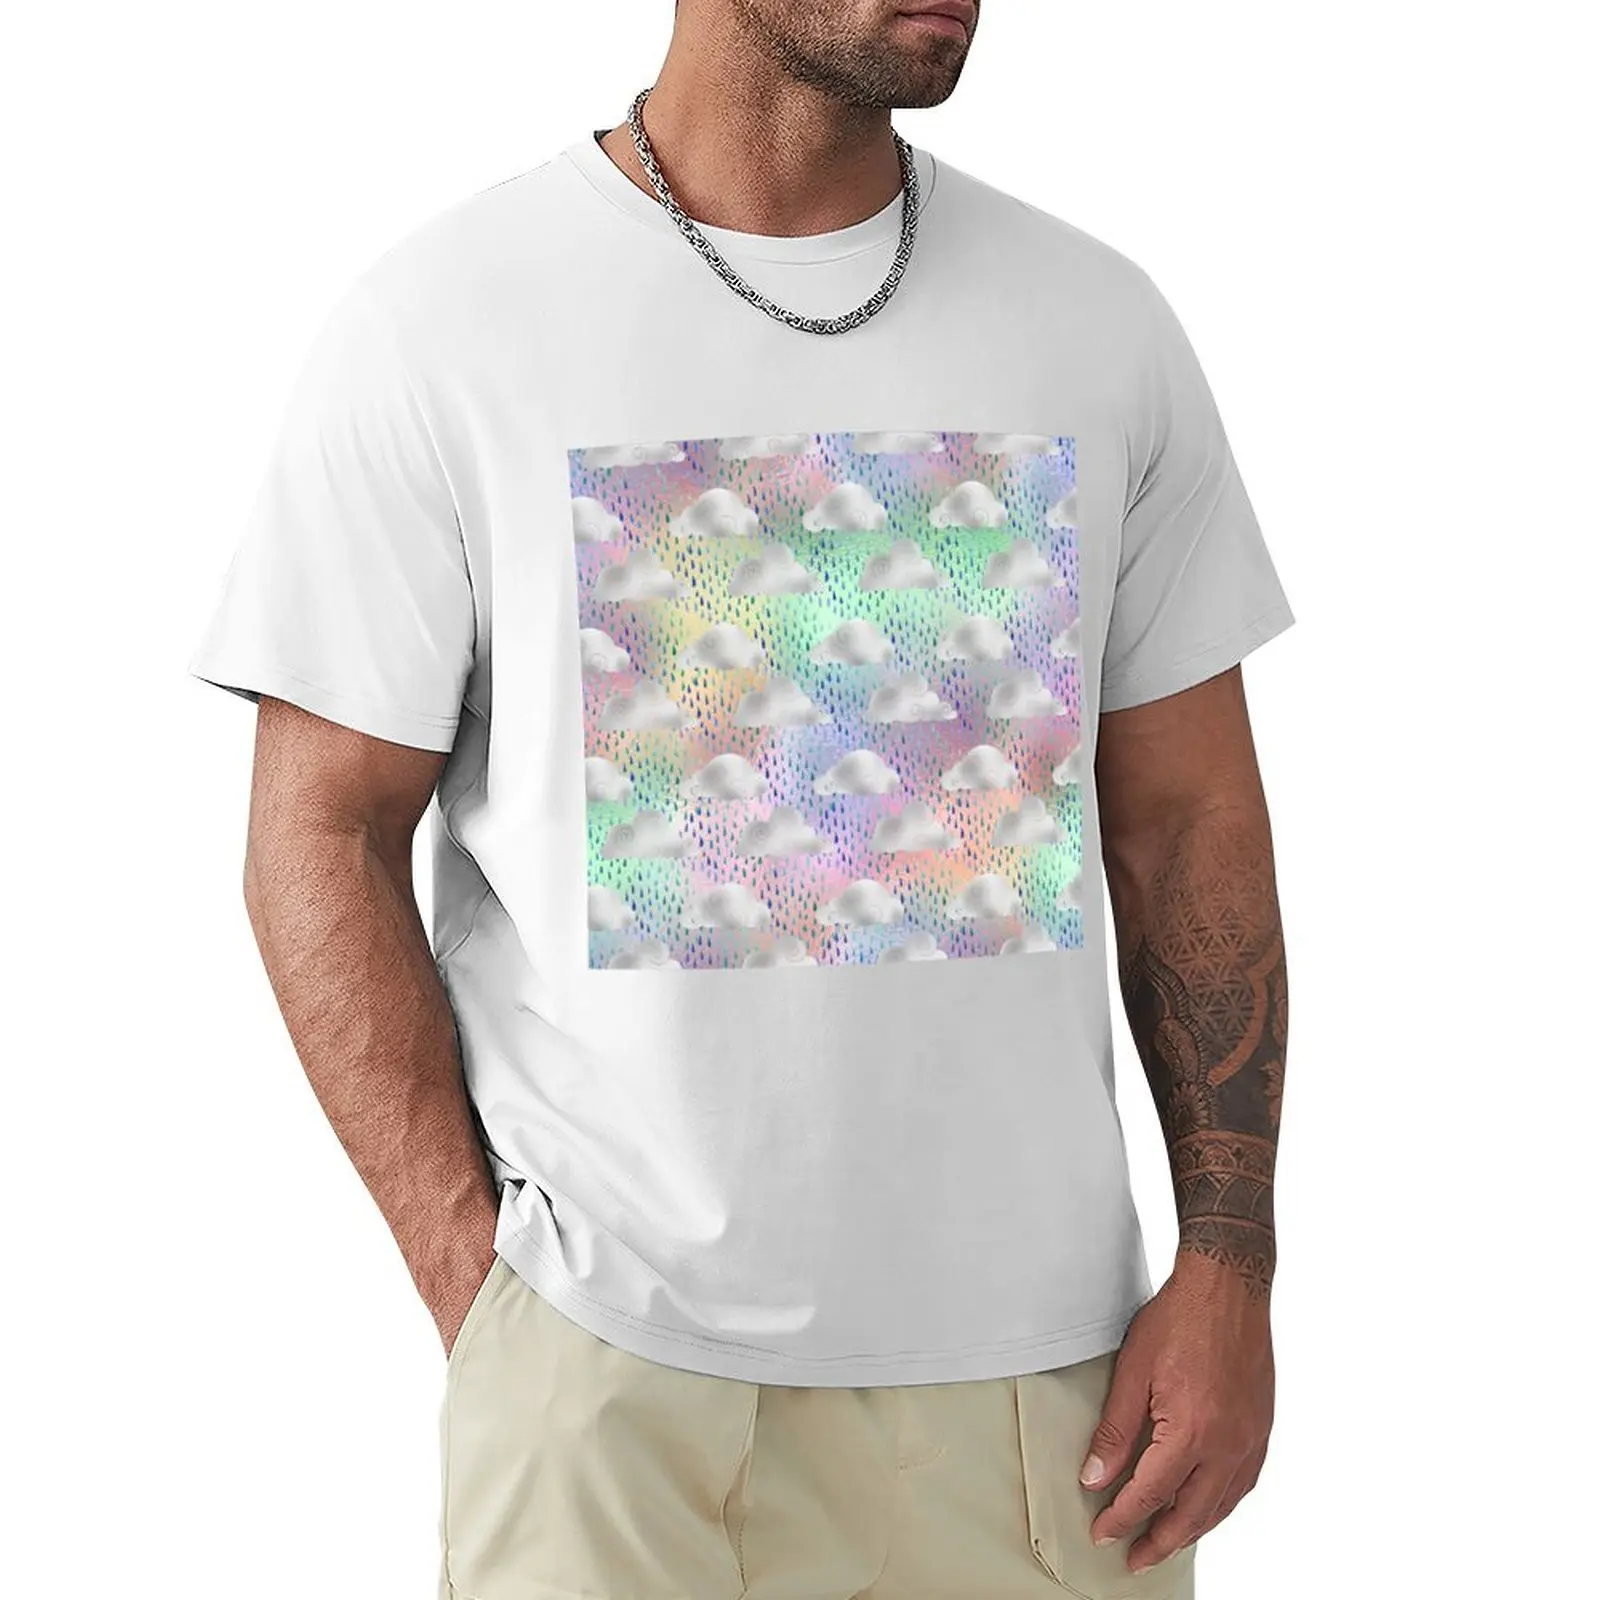 

Cool WINTER CLOUDS WITH RAINBOW SKY Designe T-Shirt sublime heavyweights Short sleeve tee plain t shirts men